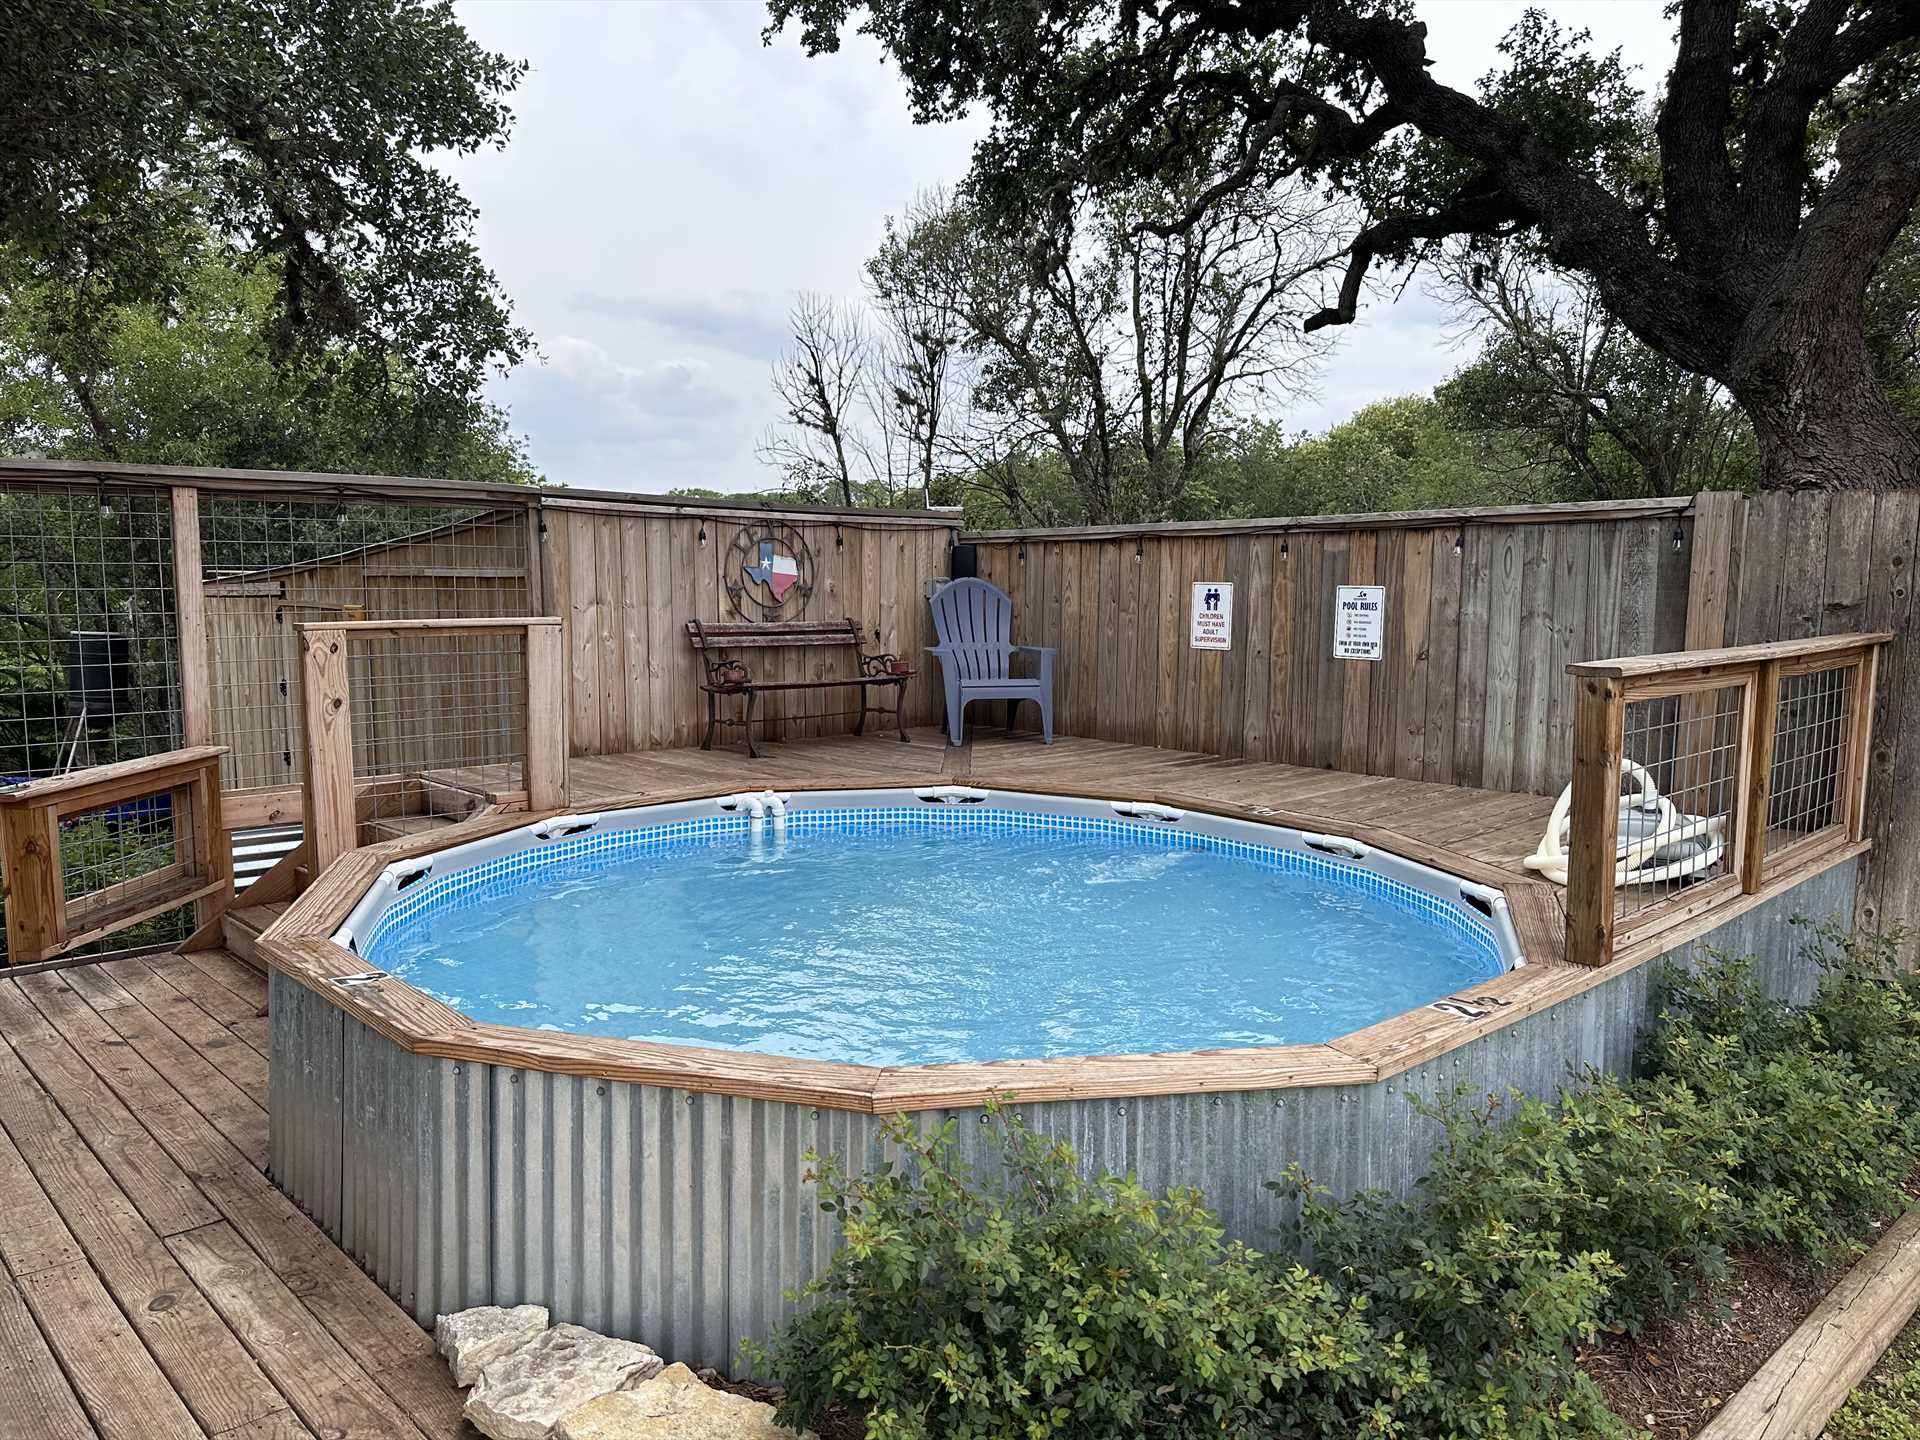                                                 During the warmer months, you can take a refreshing dip in the cowboy pool!